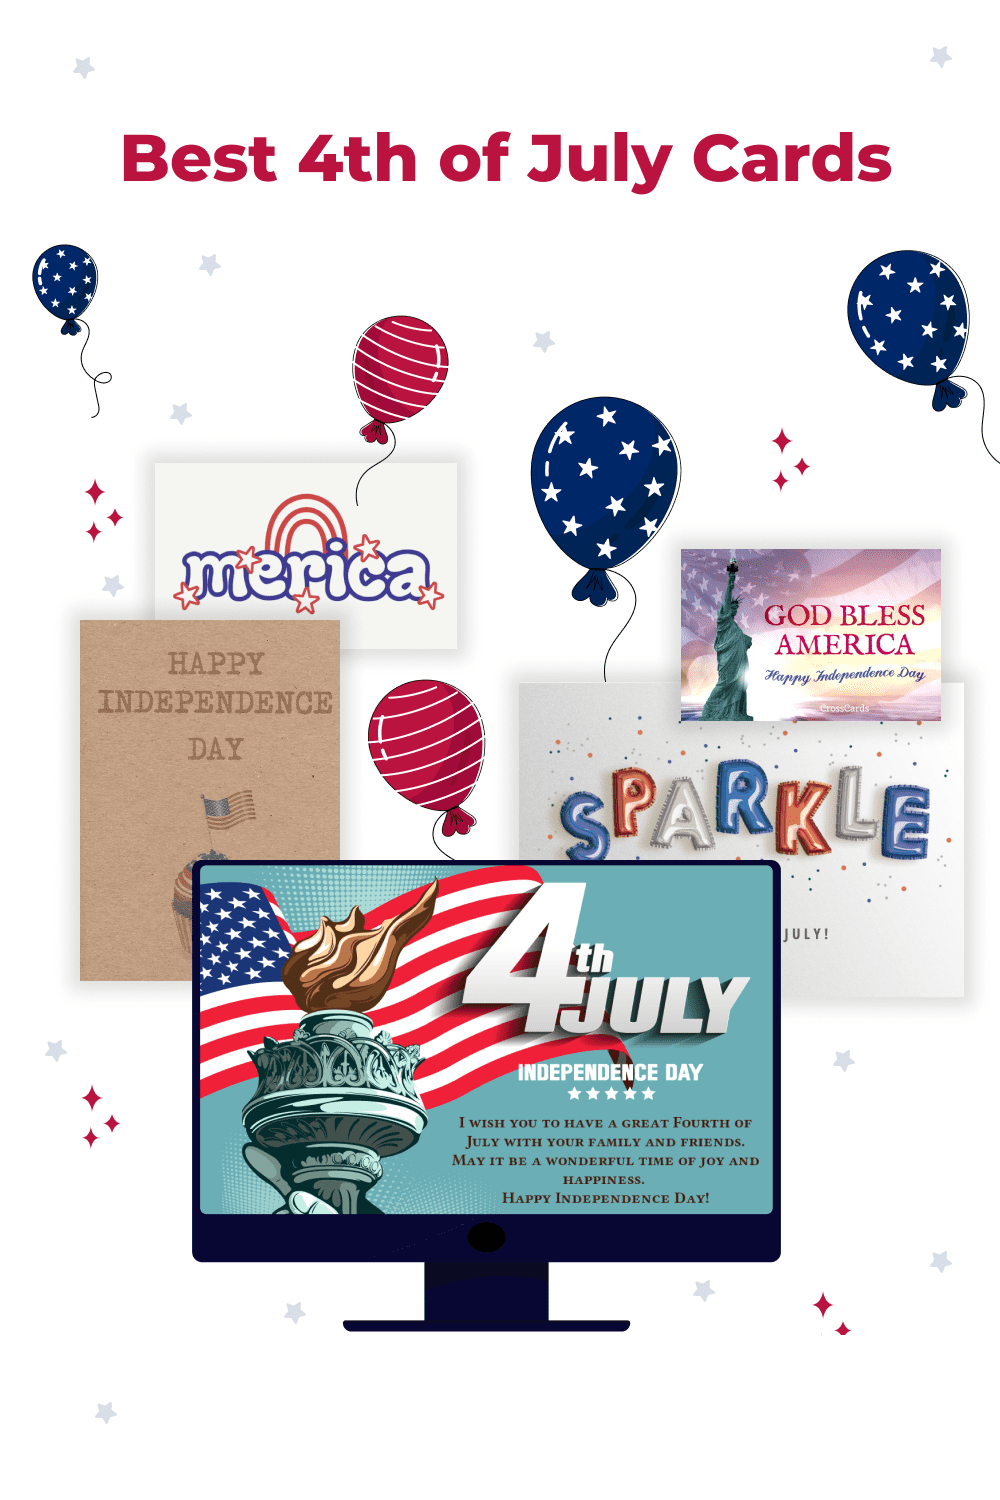 best 4th of july cards pinterest.